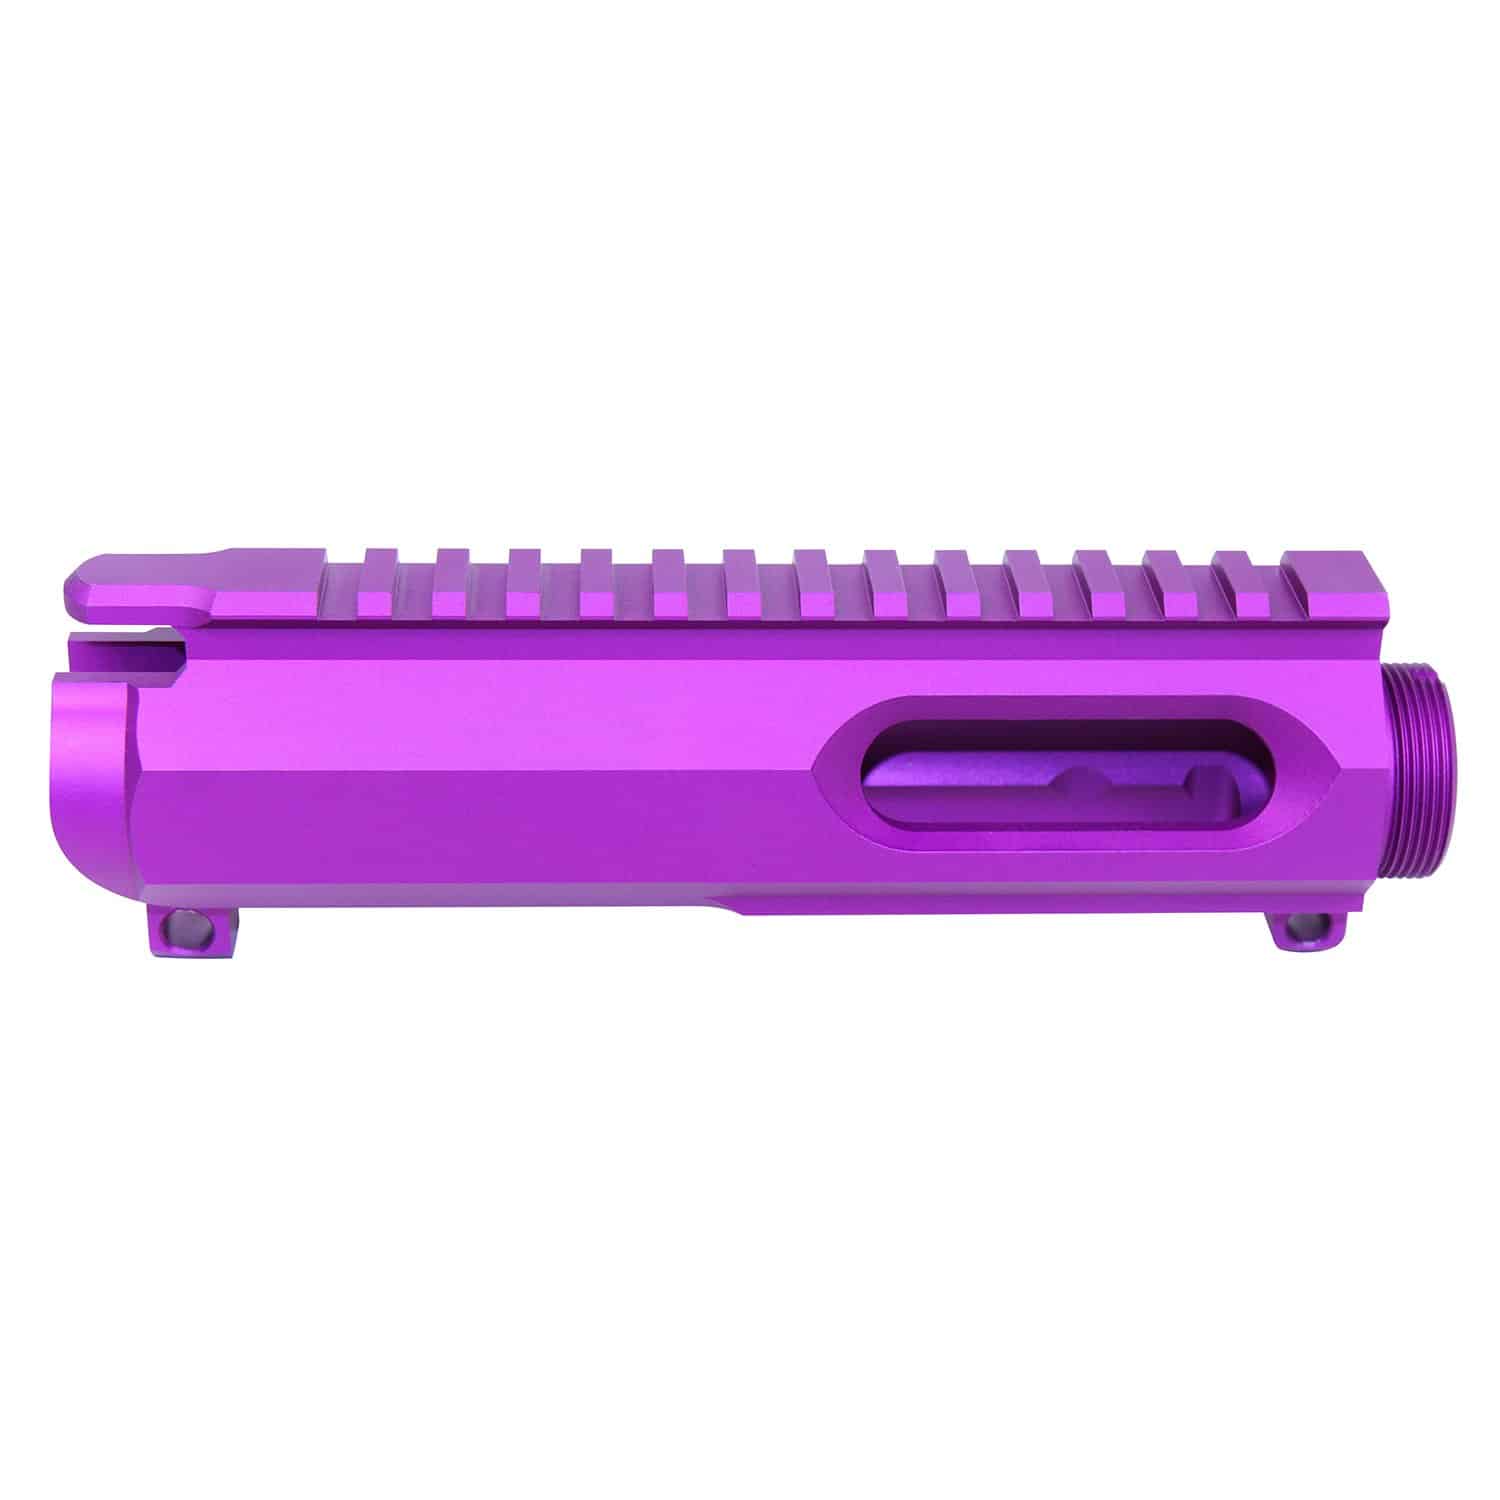 AR-15 9mm Dedicated Stripped Billet Upper Receiver in Anodized Purple